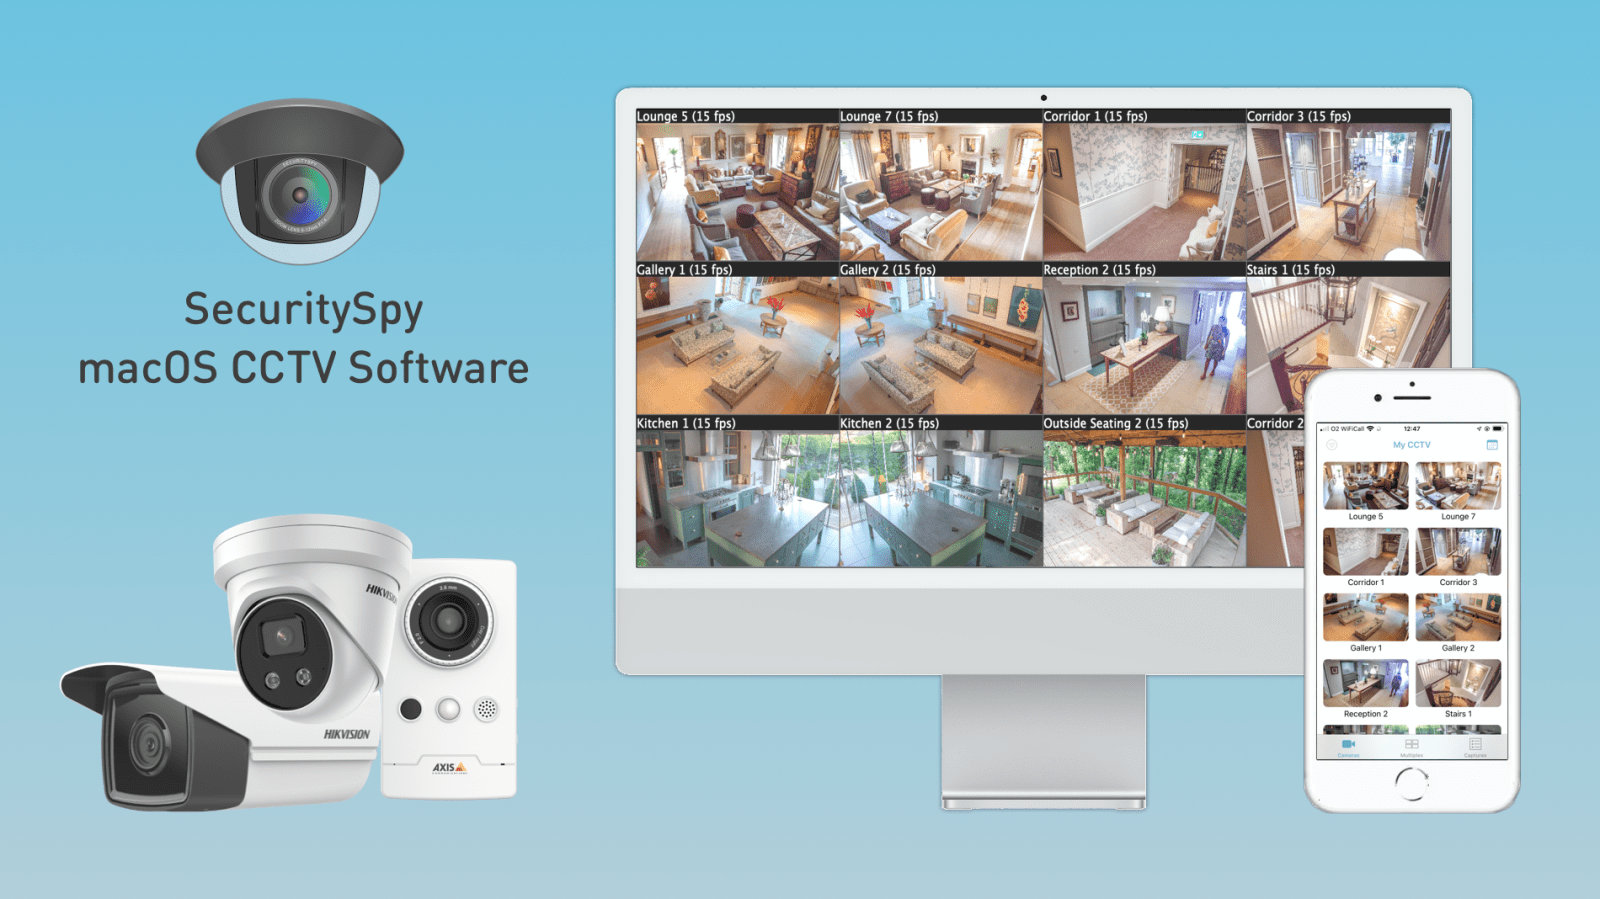 SecuritySpy turns your Mac into a full surveillance system for your home or business